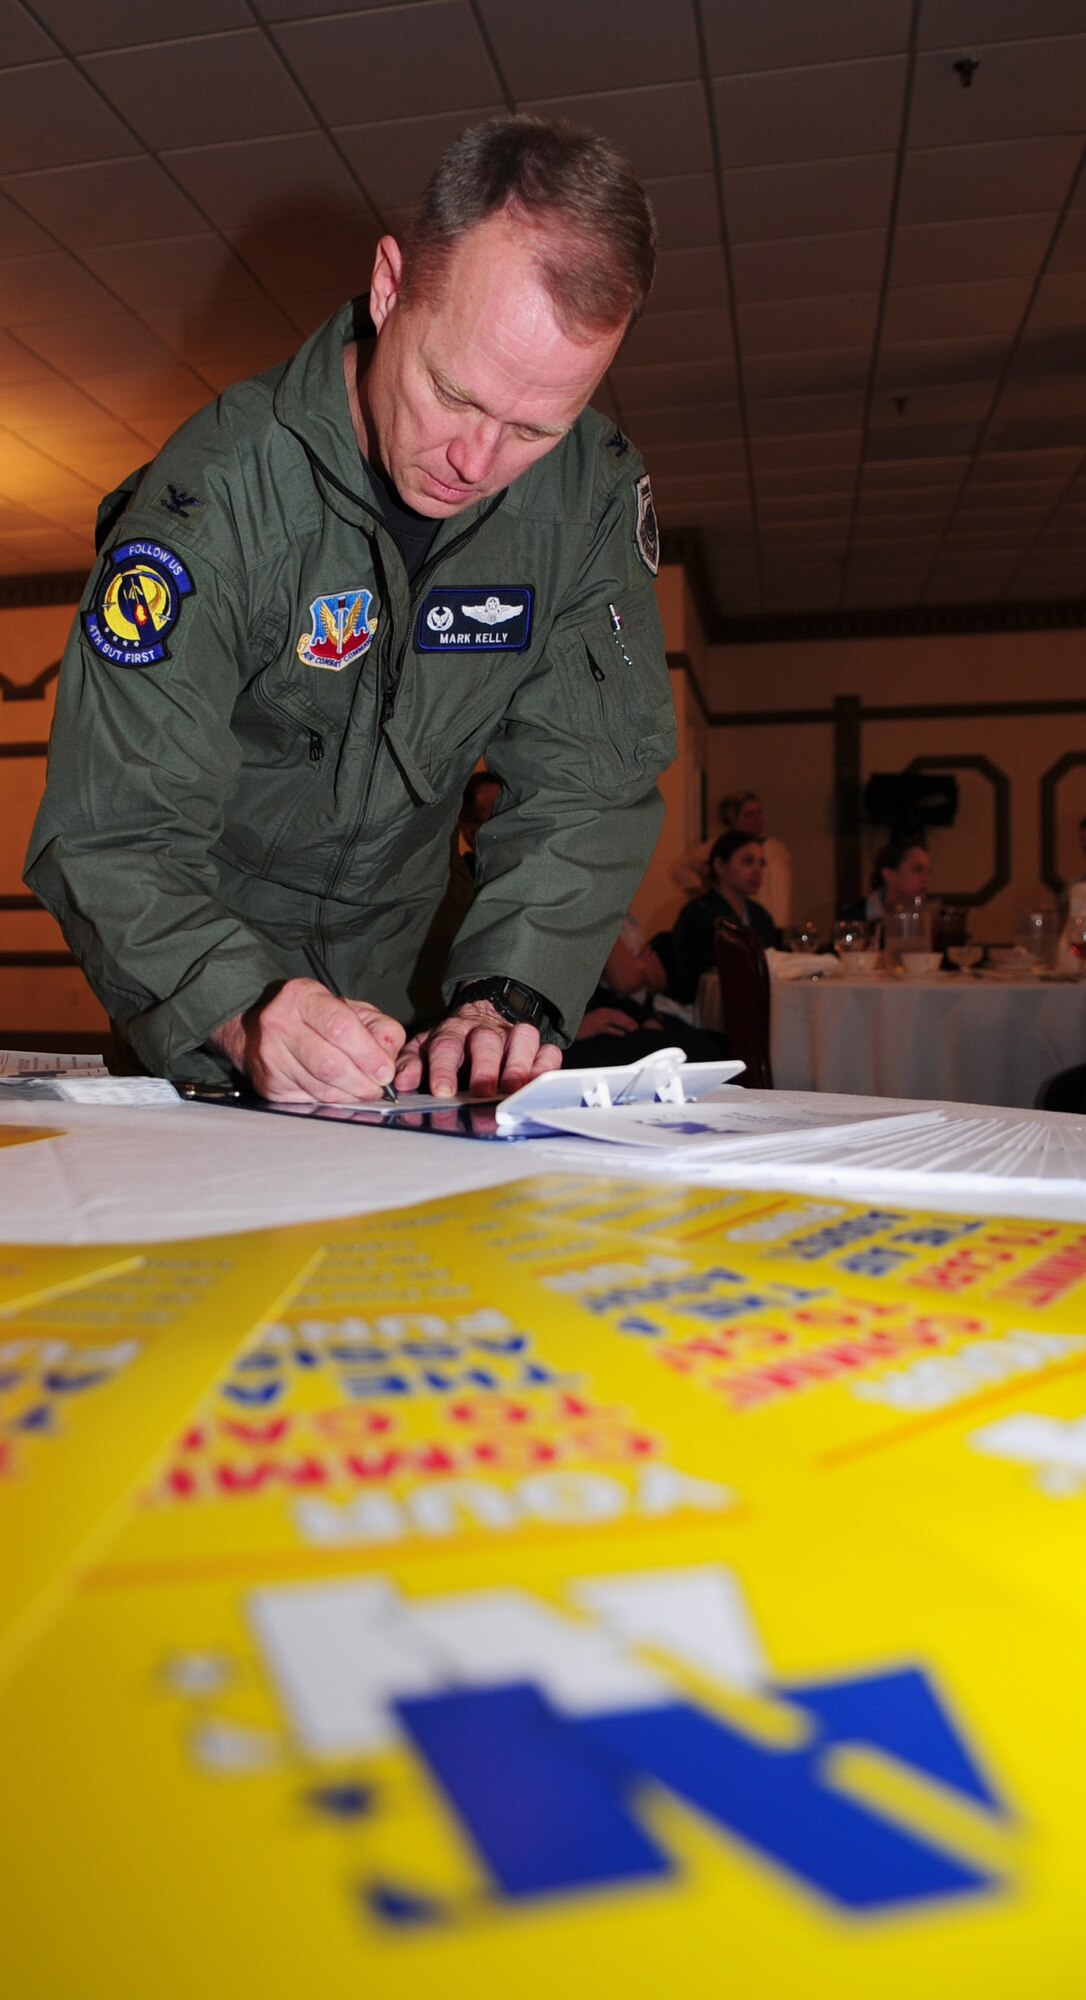 Colonel Mark D. Kelly, 4th Fighter Wing commander, signs the first donation slip for the Air Force Assistance Fund to kick of this year’s campaign at Seymour Johnson Air Force Base, N.C., March 16, 2009. The fund allows Airmen to assist victims of natural disaster or experience a family crisis. (U.S. Air Force Photo by Airman 1st Class Rae Perry)